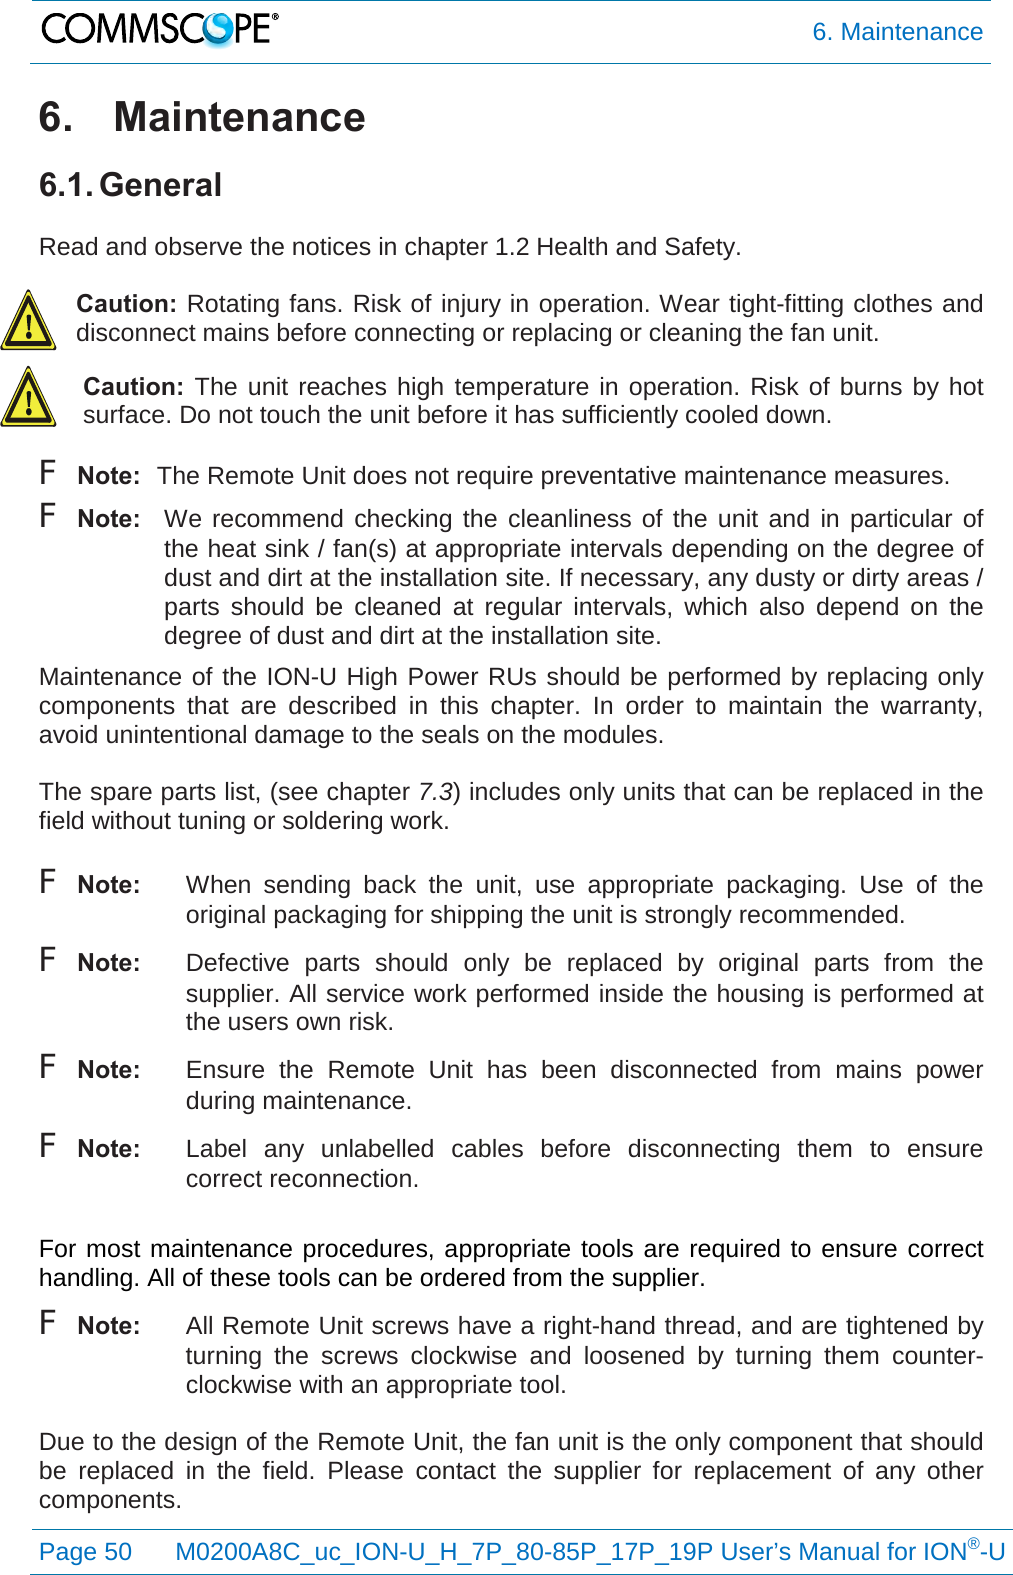  6. Maintenance  Page 50 M0200A8C_uc_ION-U_H_7P_80-85P_17P_19P User’s Manual for ION®-U  6. Maintenance 6.1. General  Read and observe the notices in chapter 1.2 Health and Safety.  Caution: Rotating fans. Risk of injury in operation. Wear tight-fitting clothes and disconnect mains before connecting or replacing or cleaning the fan unit. Caution:  The unit reaches high temperature in operation. Risk of burns by hot surface. Do not touch the unit before it has sufficiently cooled down. F Note: The Remote Unit does not require preventative maintenance measures. F Note: We recommend checking the cleanliness of the unit and in particular of the heat sink / fan(s) at appropriate intervals depending on the degree of dust and dirt at the installation site. If necessary, any dusty or dirty areas / parts should be cleaned at regular intervals, which also depend on the degree of dust and dirt at the installation site. Maintenance of the ION-U High Power RUs should be performed by replacing only components that are described in this chapter. In order to maintain the  warranty, avoid unintentional damage to the seals on the modules.  The spare parts list, (see chapter 7.3) includes only units that can be replaced in the field without tuning or soldering work.  F Note: When sending back the unit, use appropriate packaging.  Use of the original packaging for shipping the unit is strongly recommended. F Note: Defective parts should only be replaced by original parts from the supplier. All service work performed inside the housing is performed at the users own risk. F Note: Ensure the Remote Unit has been disconnected from mains power during maintenance. F Note: Label any unlabelled cables before disconnecting them to ensure correct reconnection.  For most maintenance procedures, appropriate tools are required to ensure correct handling. All of these tools can be ordered from the supplier.  F Note:  All Remote Unit screws have a right-hand thread, and are tightened by turning the screws clockwise and loosened by turning them counter-clockwise with an appropriate tool.  Due to the design of the Remote Unit, the fan unit is the only component that should be replaced in the field. Please contact the supplier for replacement of any other components. 